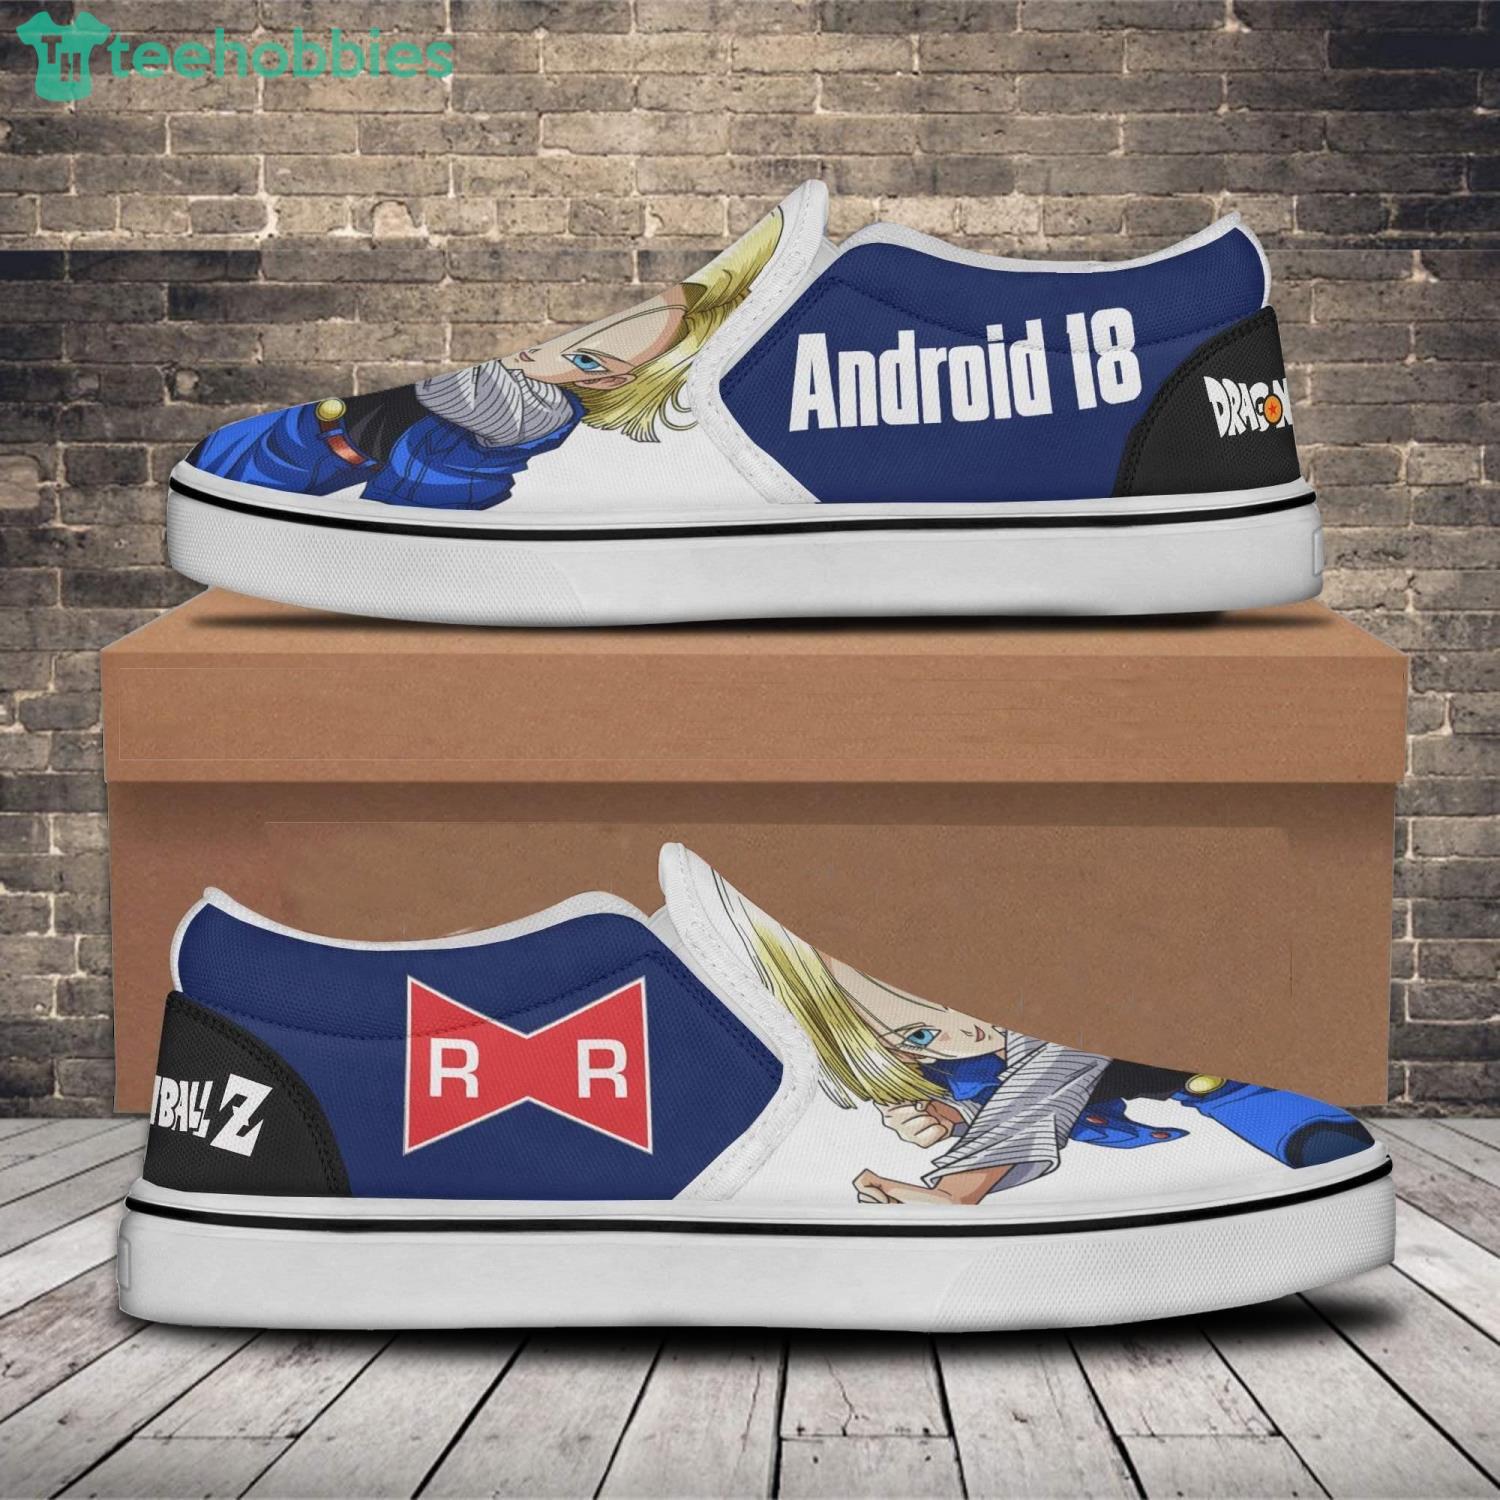 Dragon Ball Super: Super Hero Android 18 Black Cosplay Shoes